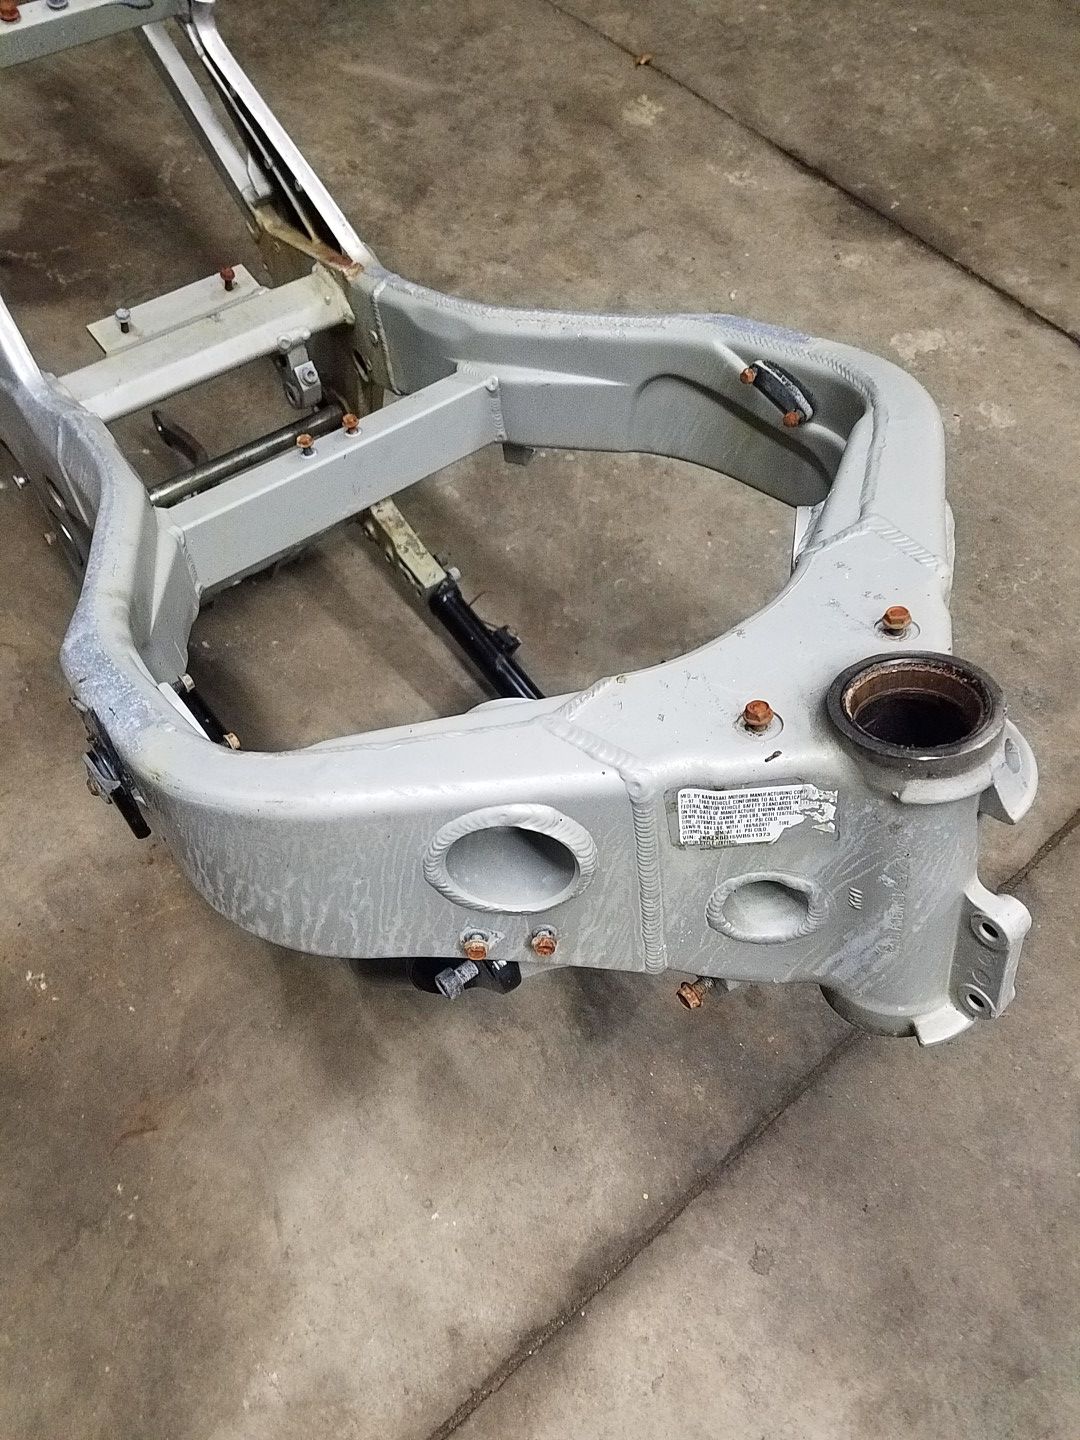 1998 ZX11 MOTORCYCLE FRAME many other parts no title